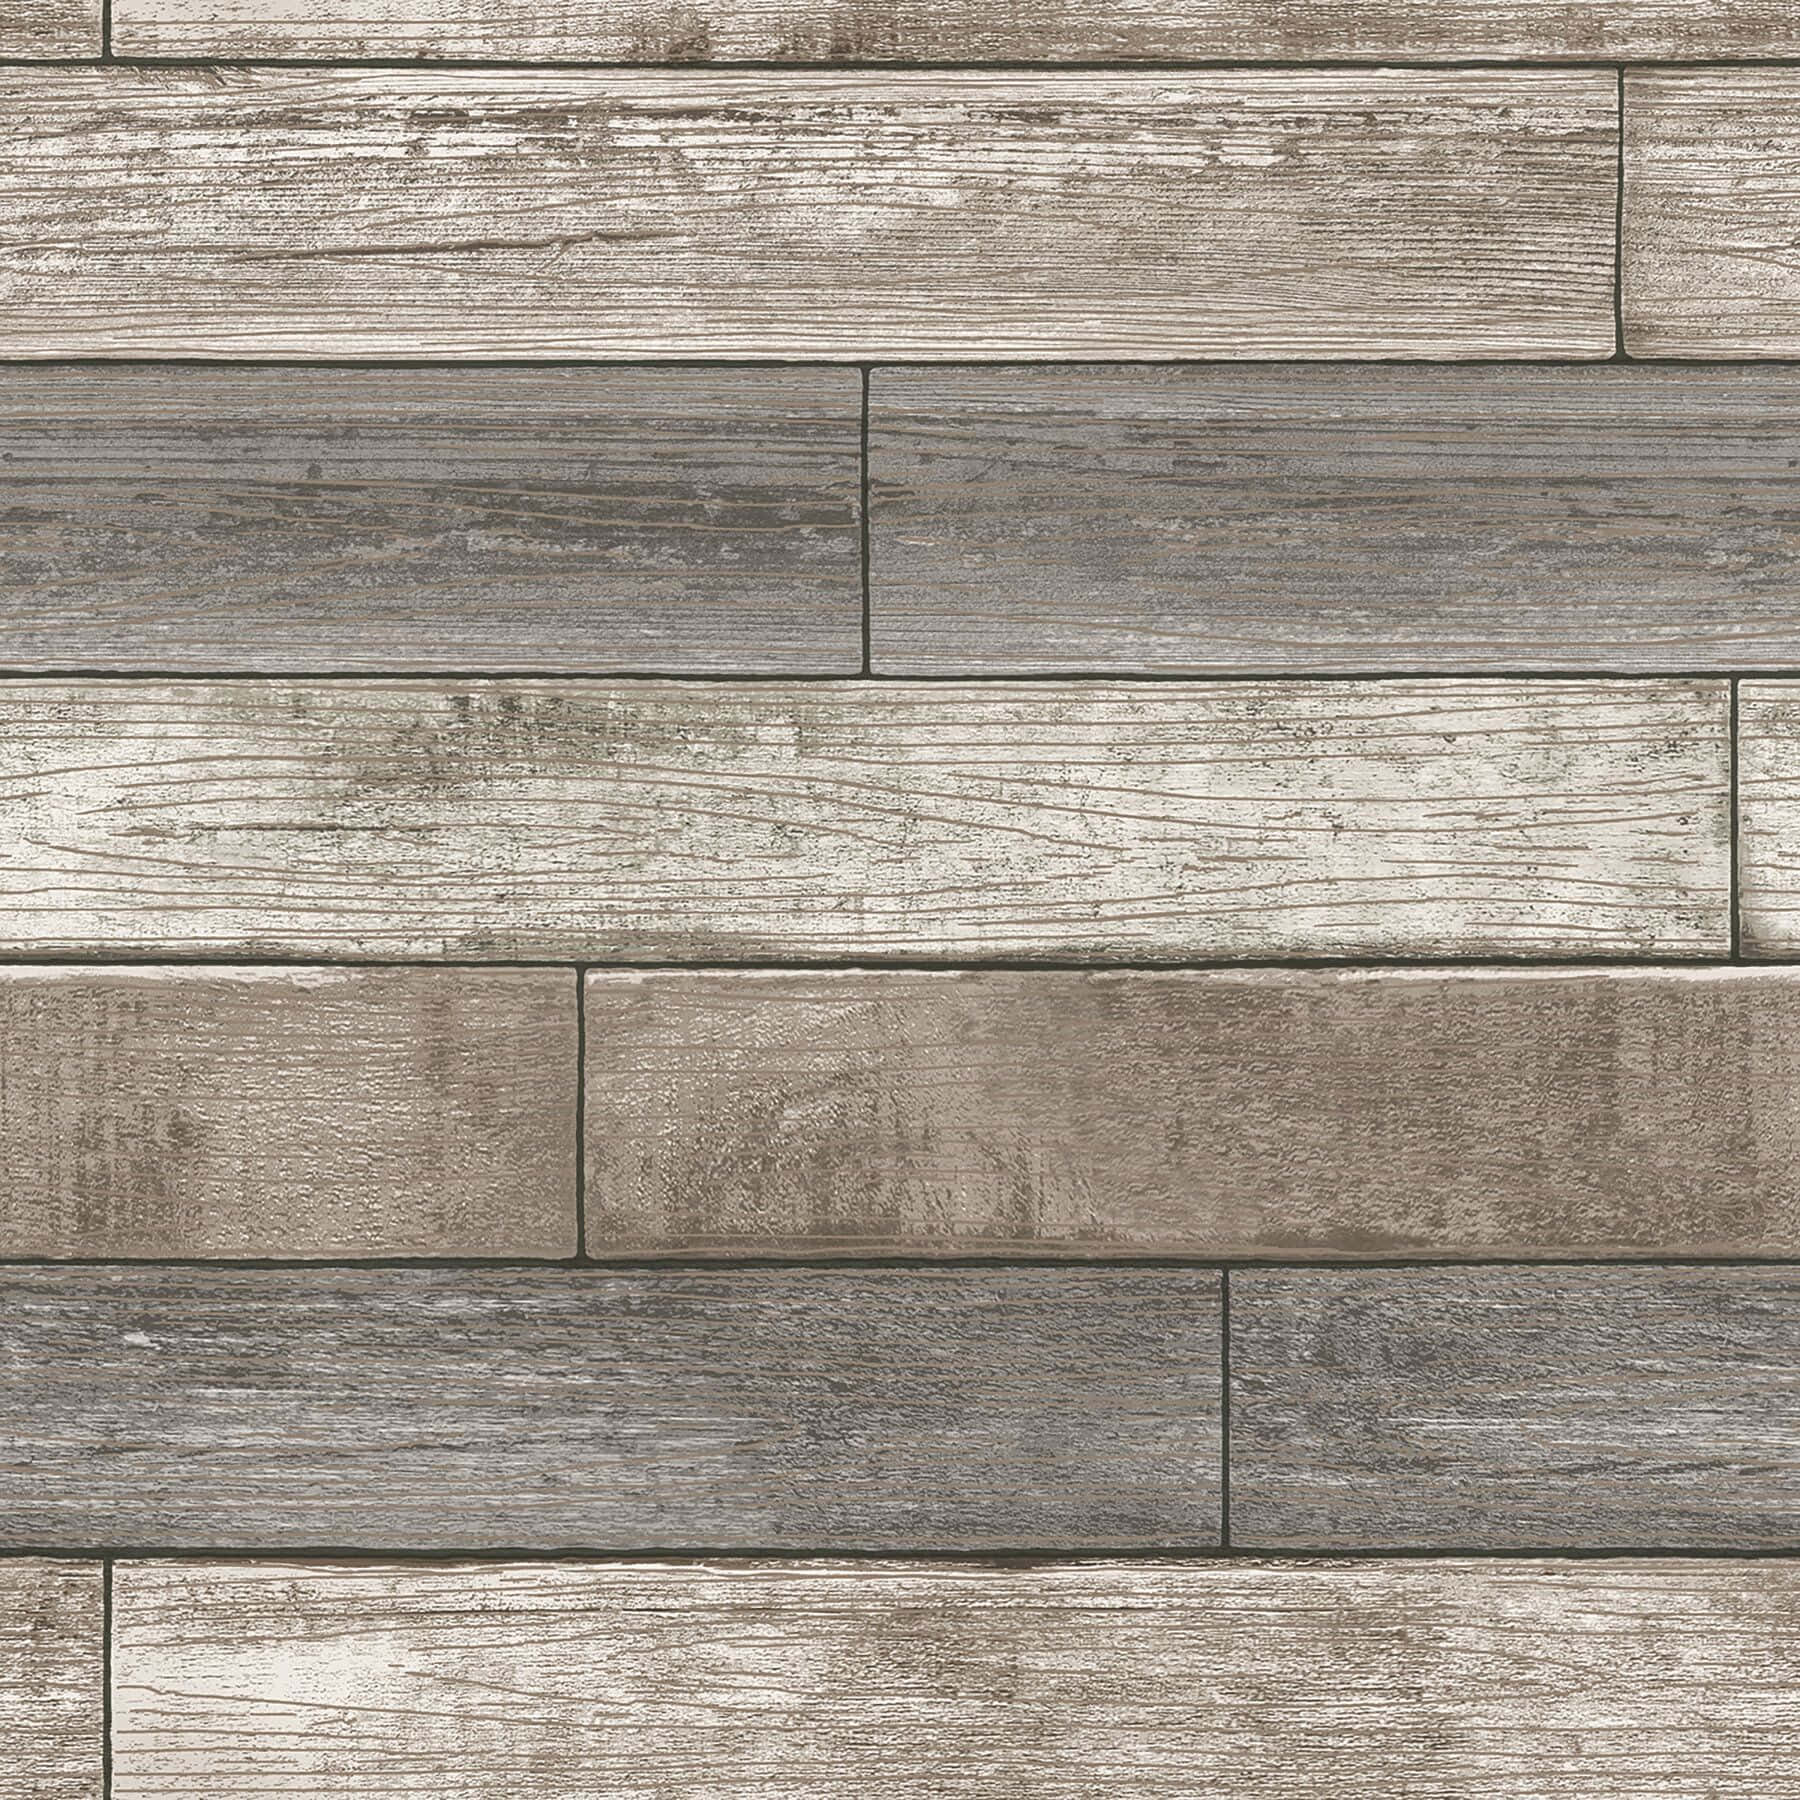 A Wooden Wall With Gray And White Stripes Wallpaper